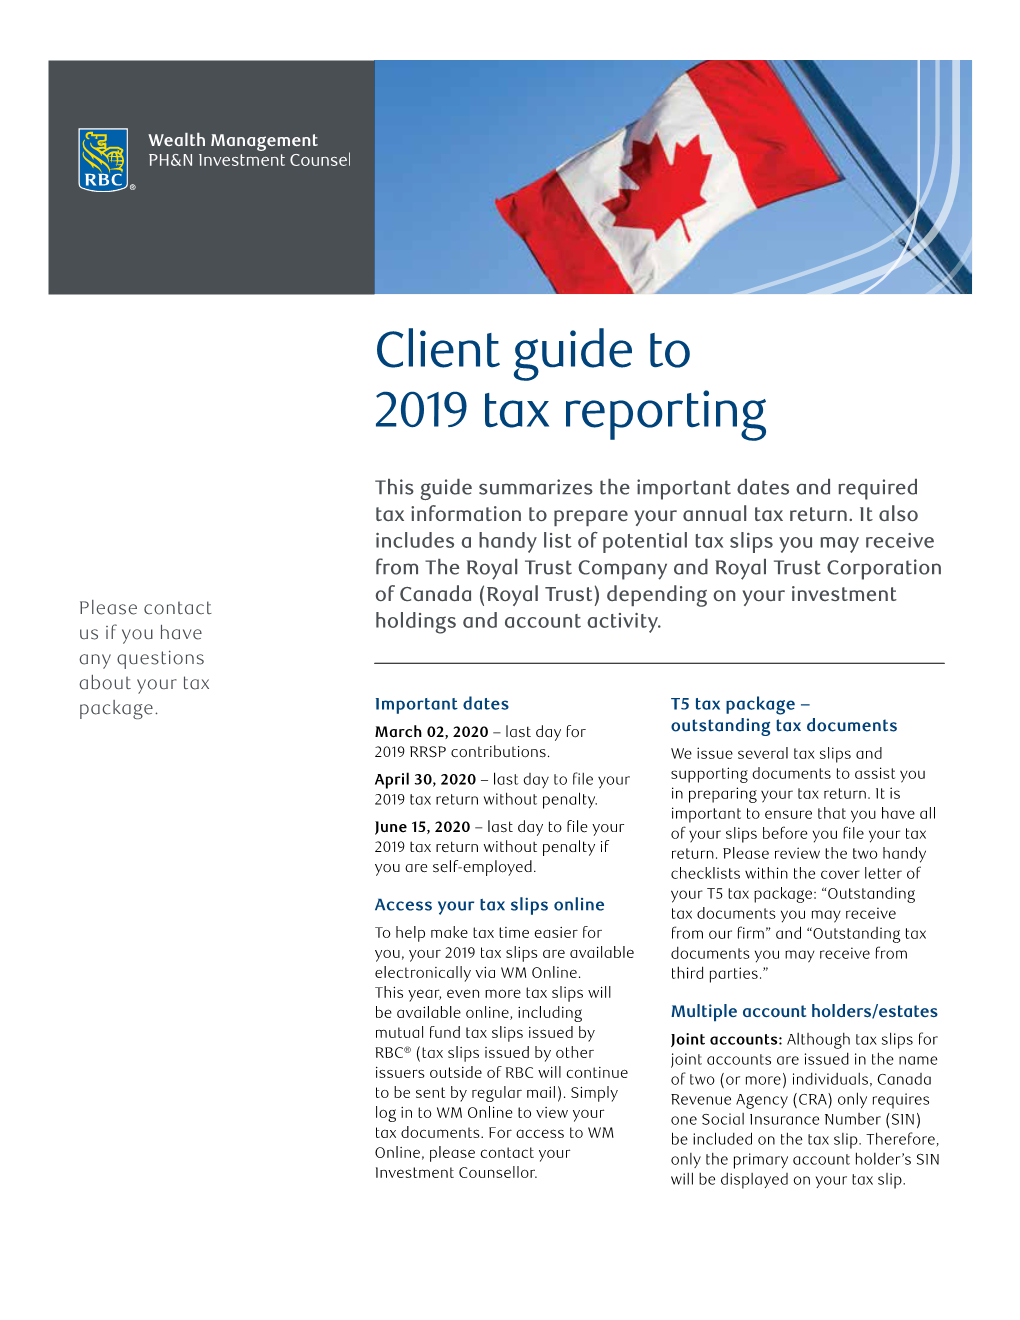 Client Guide to 2019 Tax Reporting